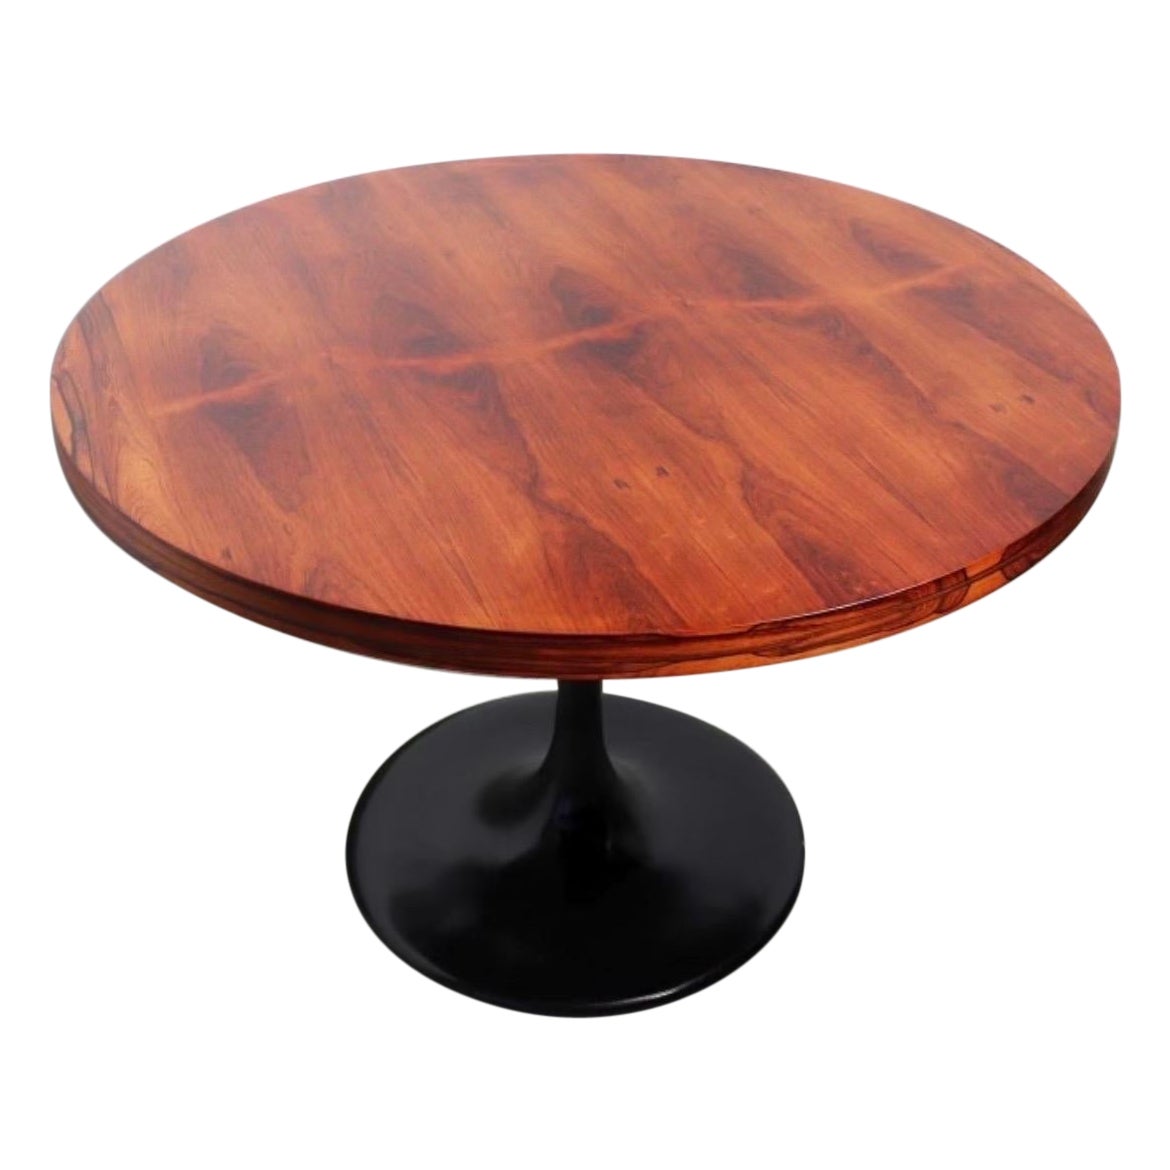 Rosewood Circular Dining or Foyer Table by Milo Baughman with Black Tulip Base